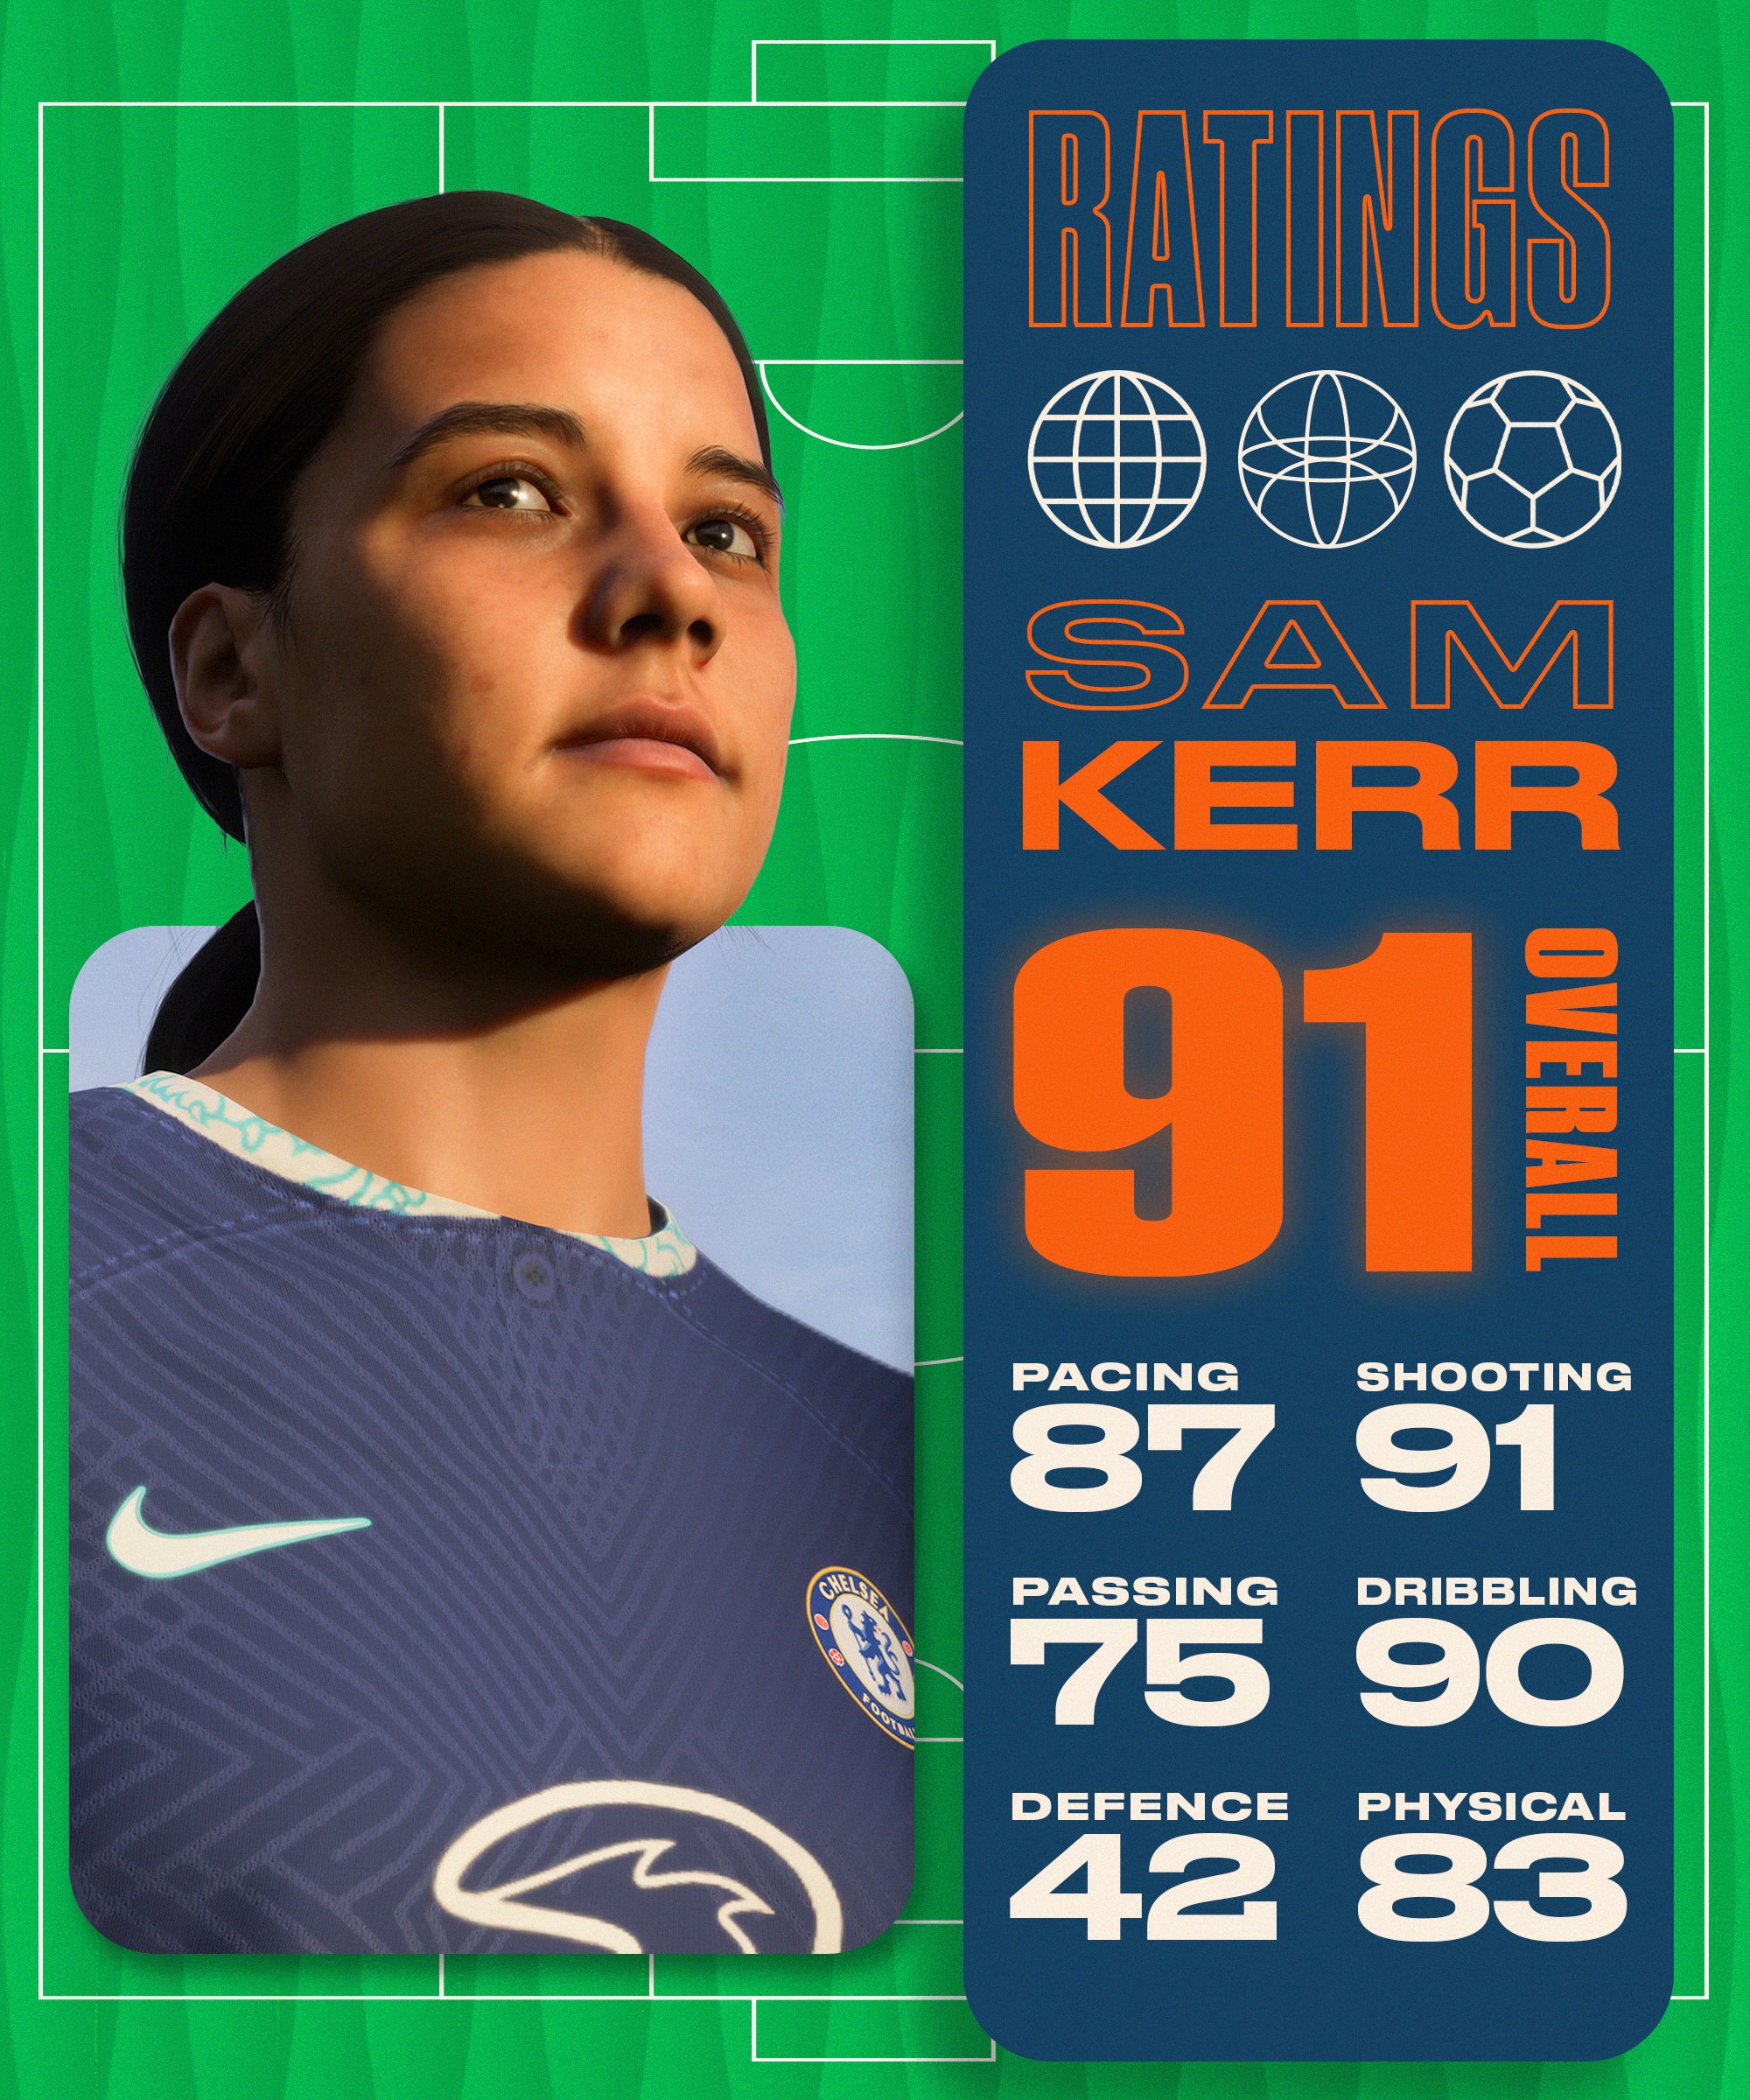 FIFA 23 Women’s Football – Here’s Everything You Need To Know